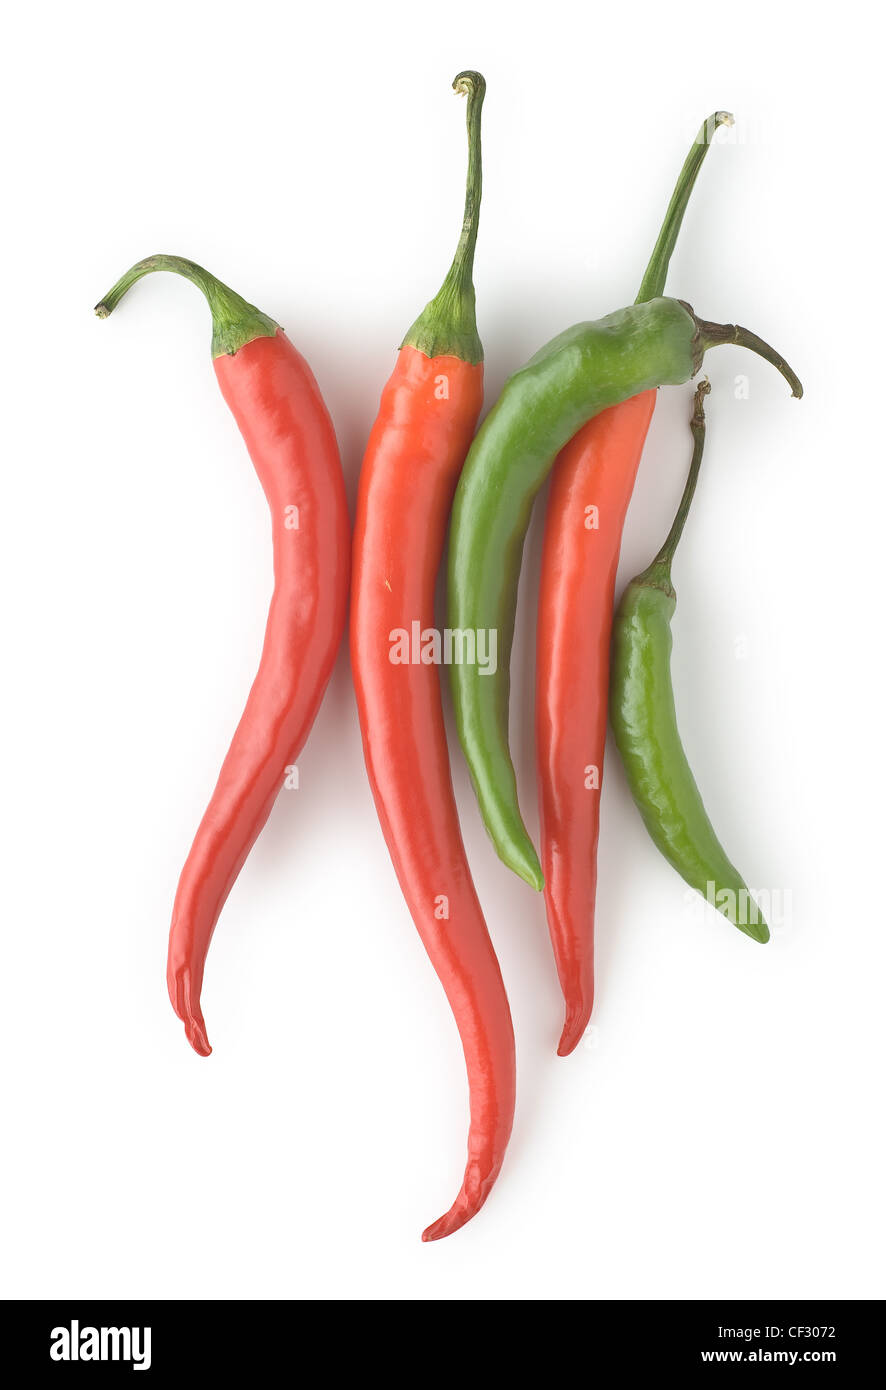 Chili Peppers as a Healthy and Nutritious Vegetable Stock Photo